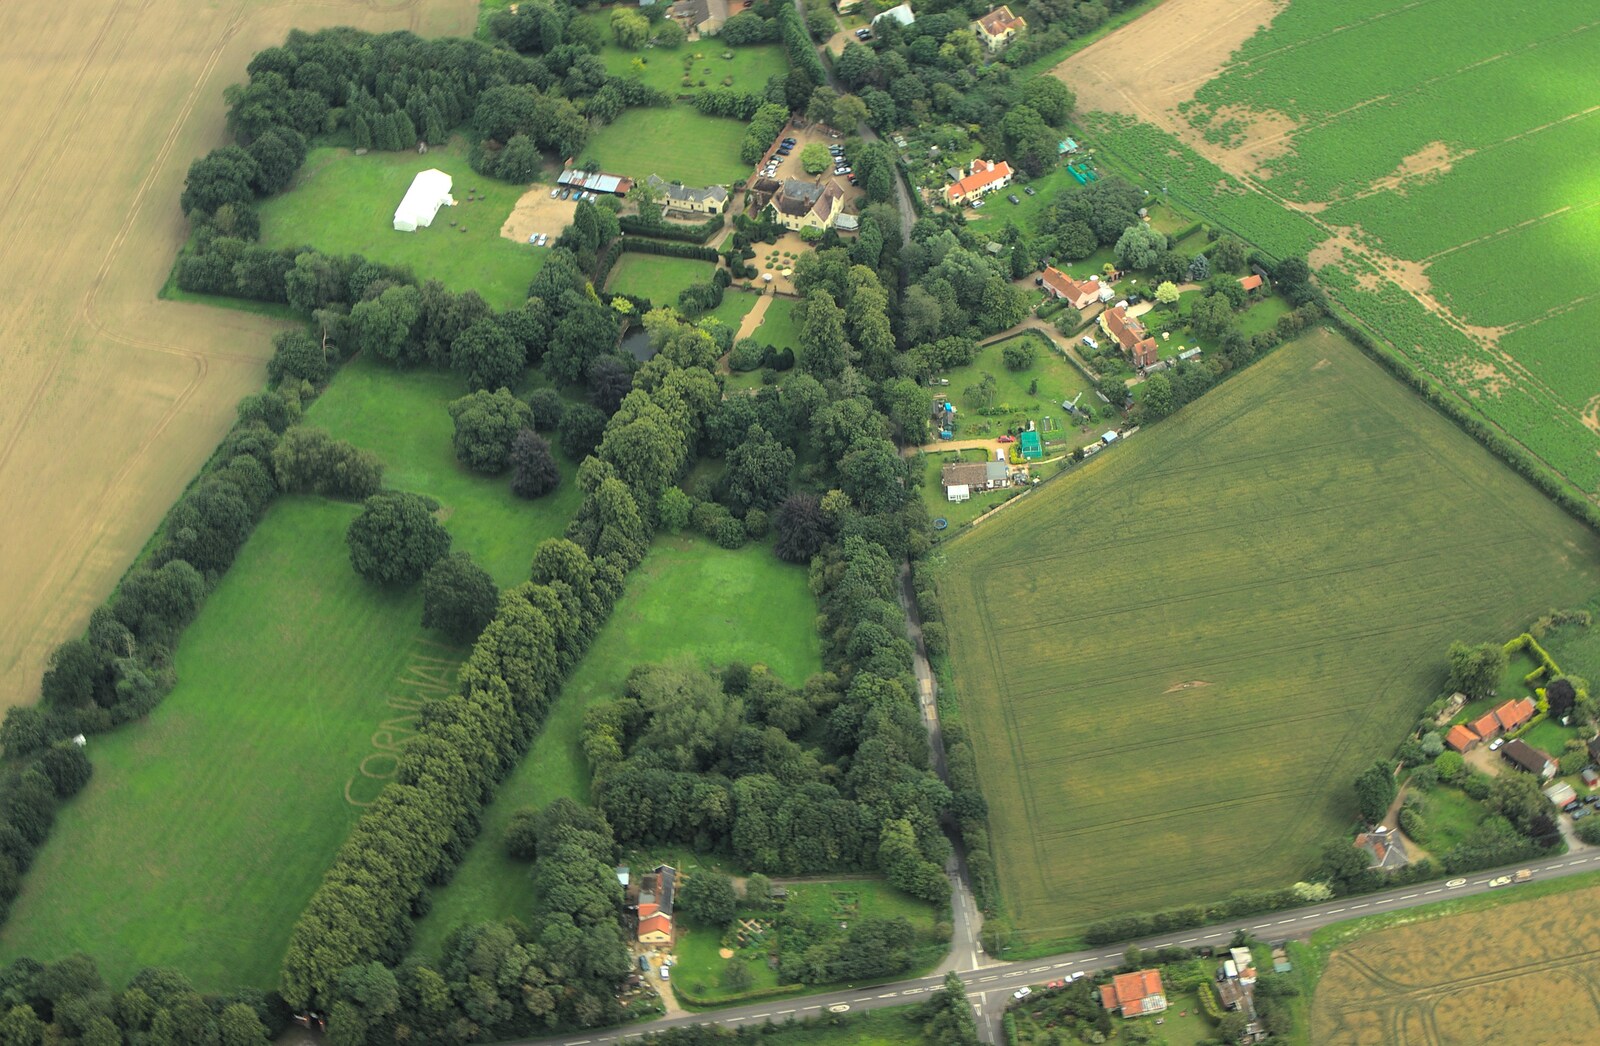 The avenue of the nearby Cornwallis Hotel from Nosher Flies in a P-51D Mustang, Hardwick Airfield, Norfolk (and the Whole of Suffolk) - 17th July 2011